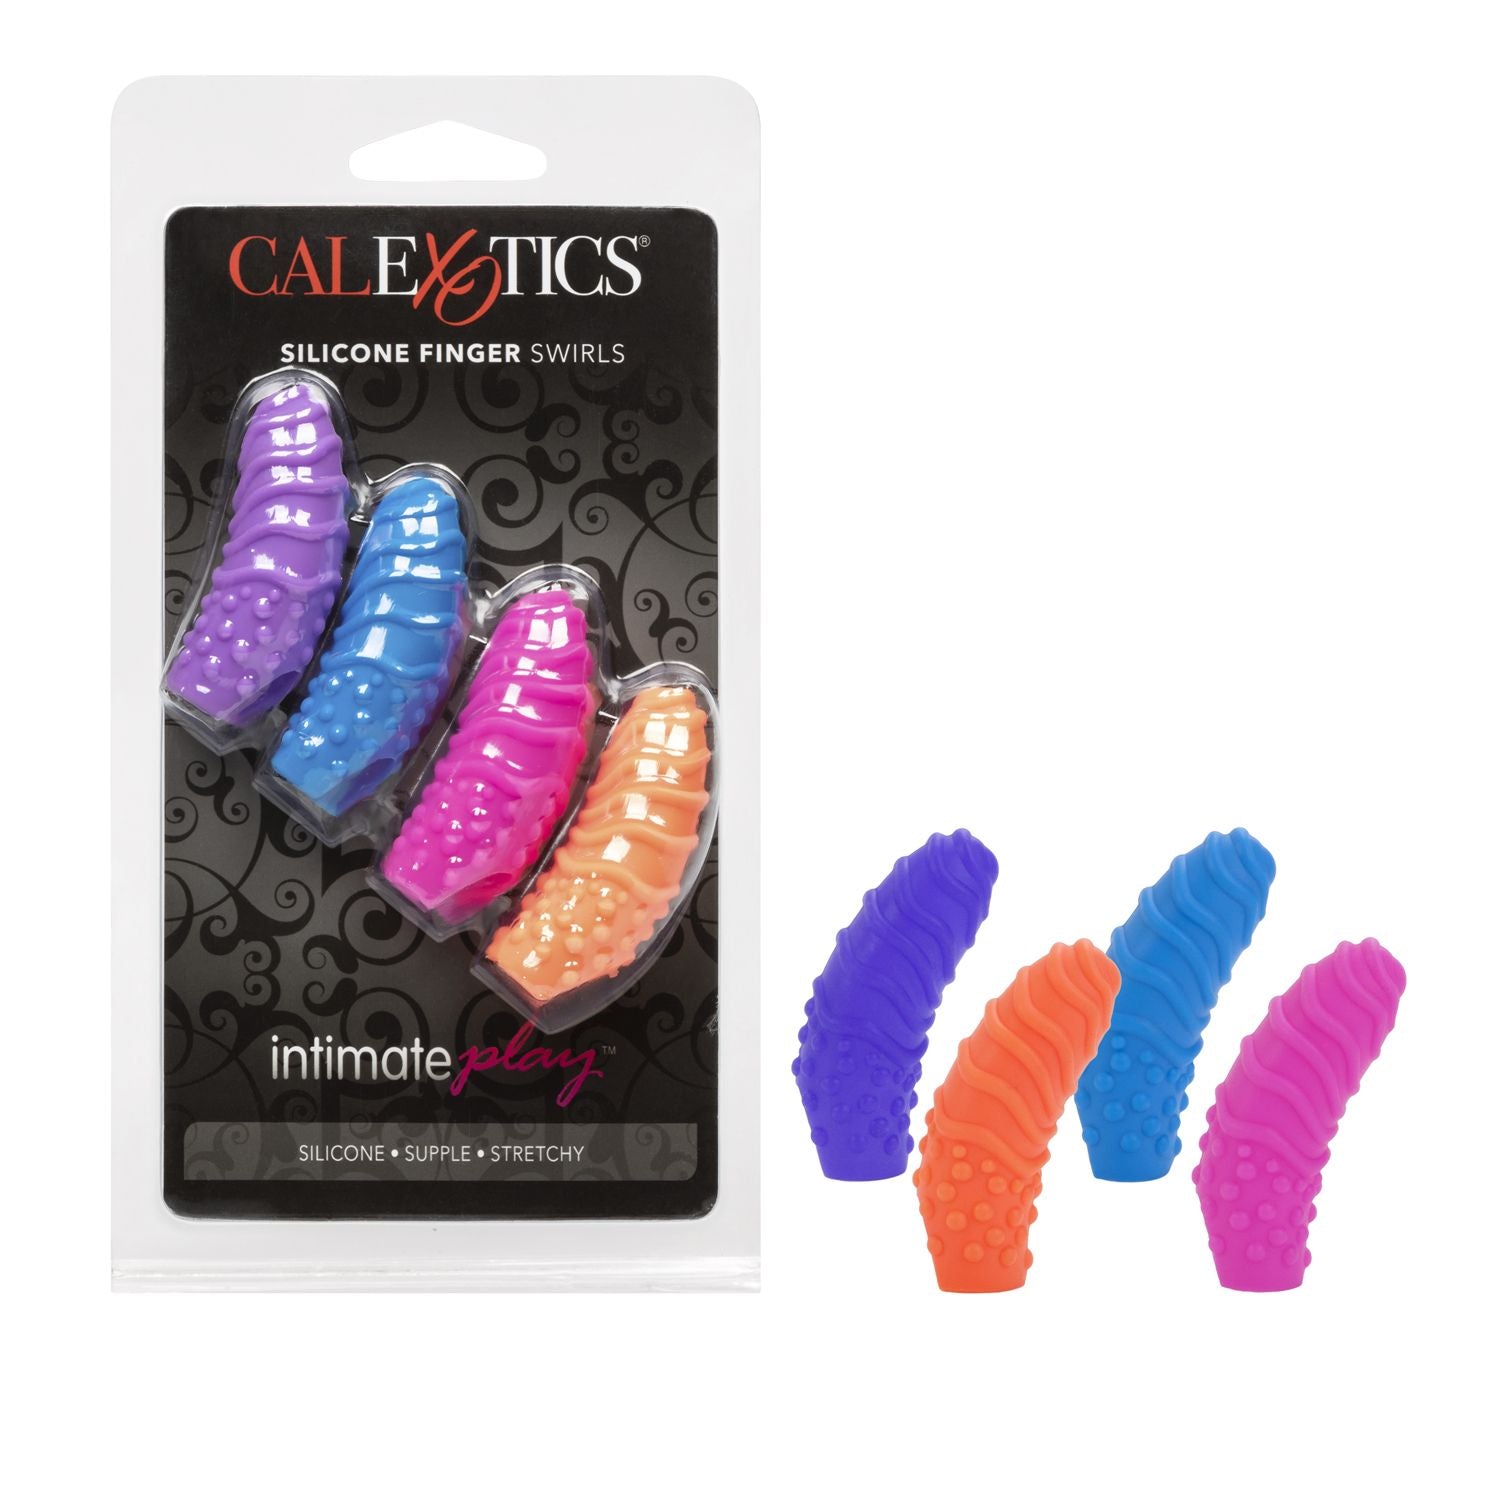 Set Intimate Play Silicone Finger Swirls Cake Sex Shop Juguetes Sexuales para Adultos